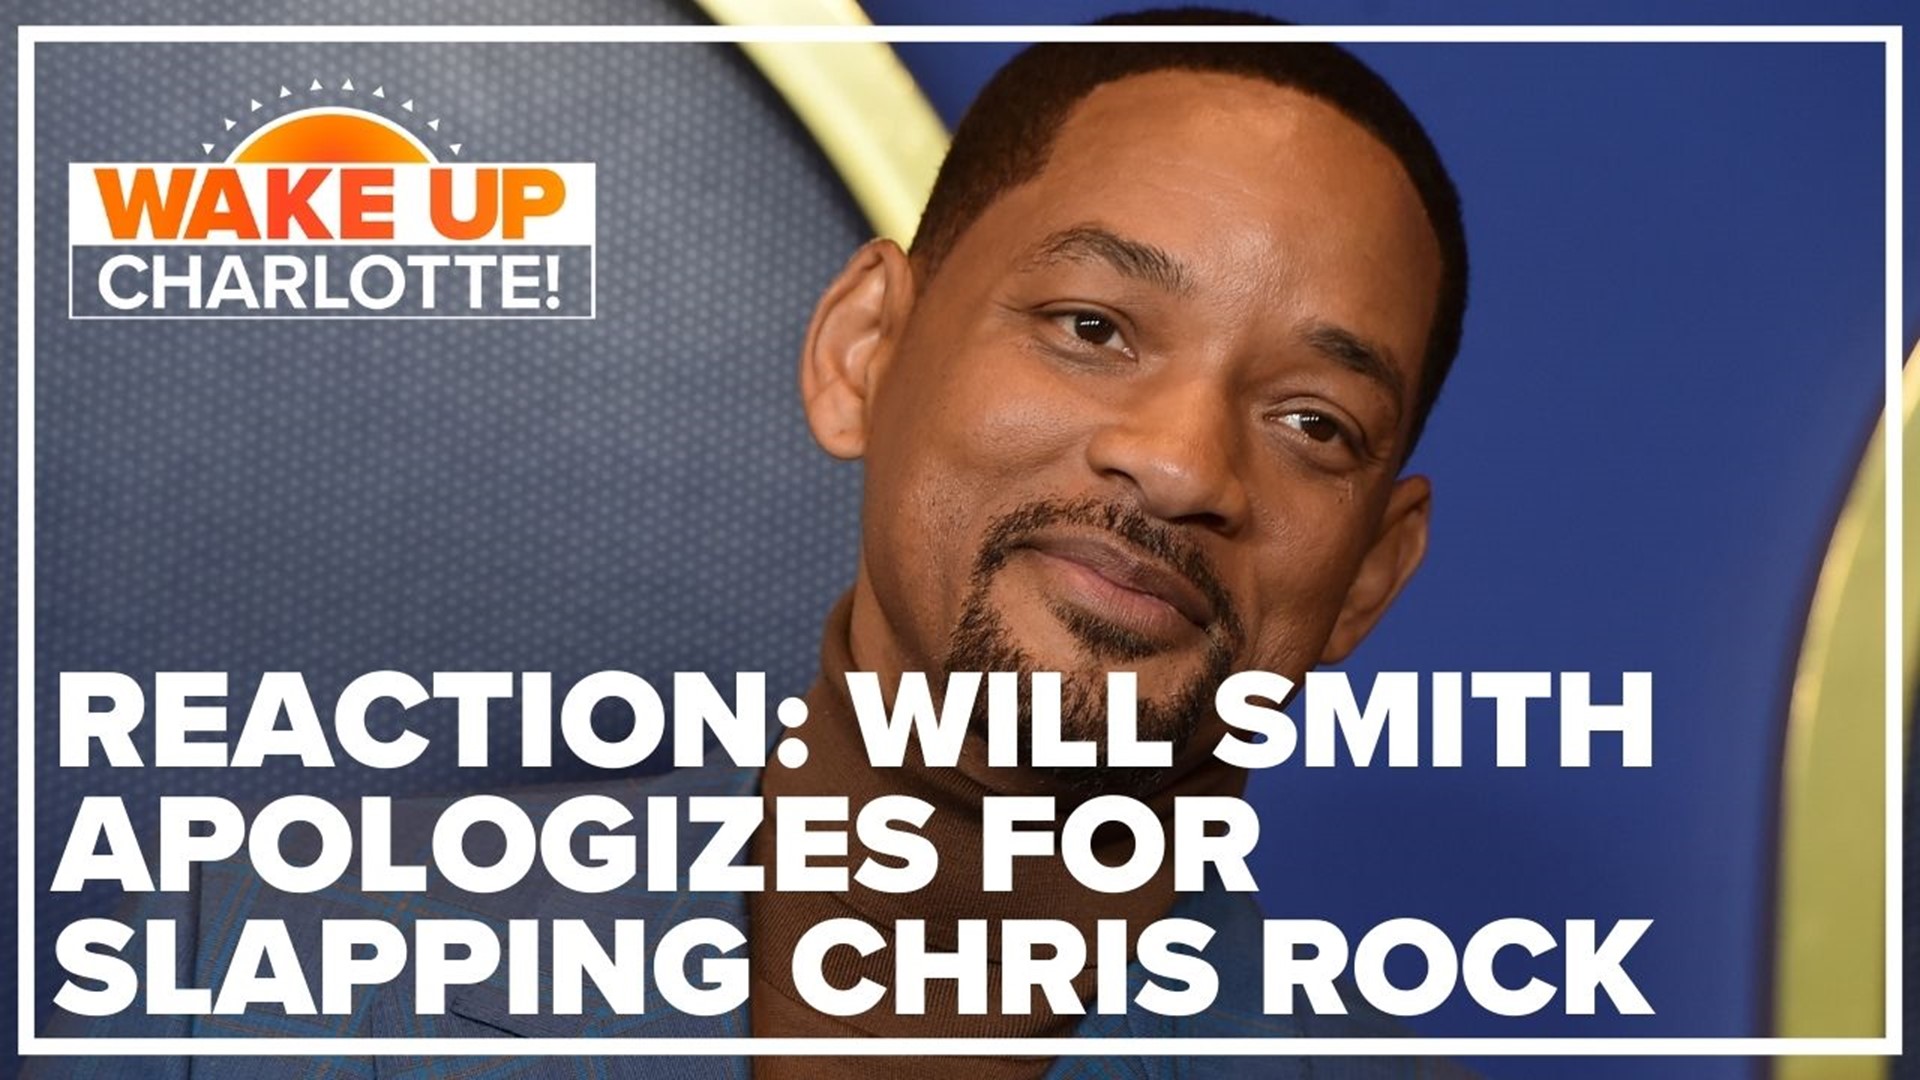 Chris rock video will smith Will Smith's